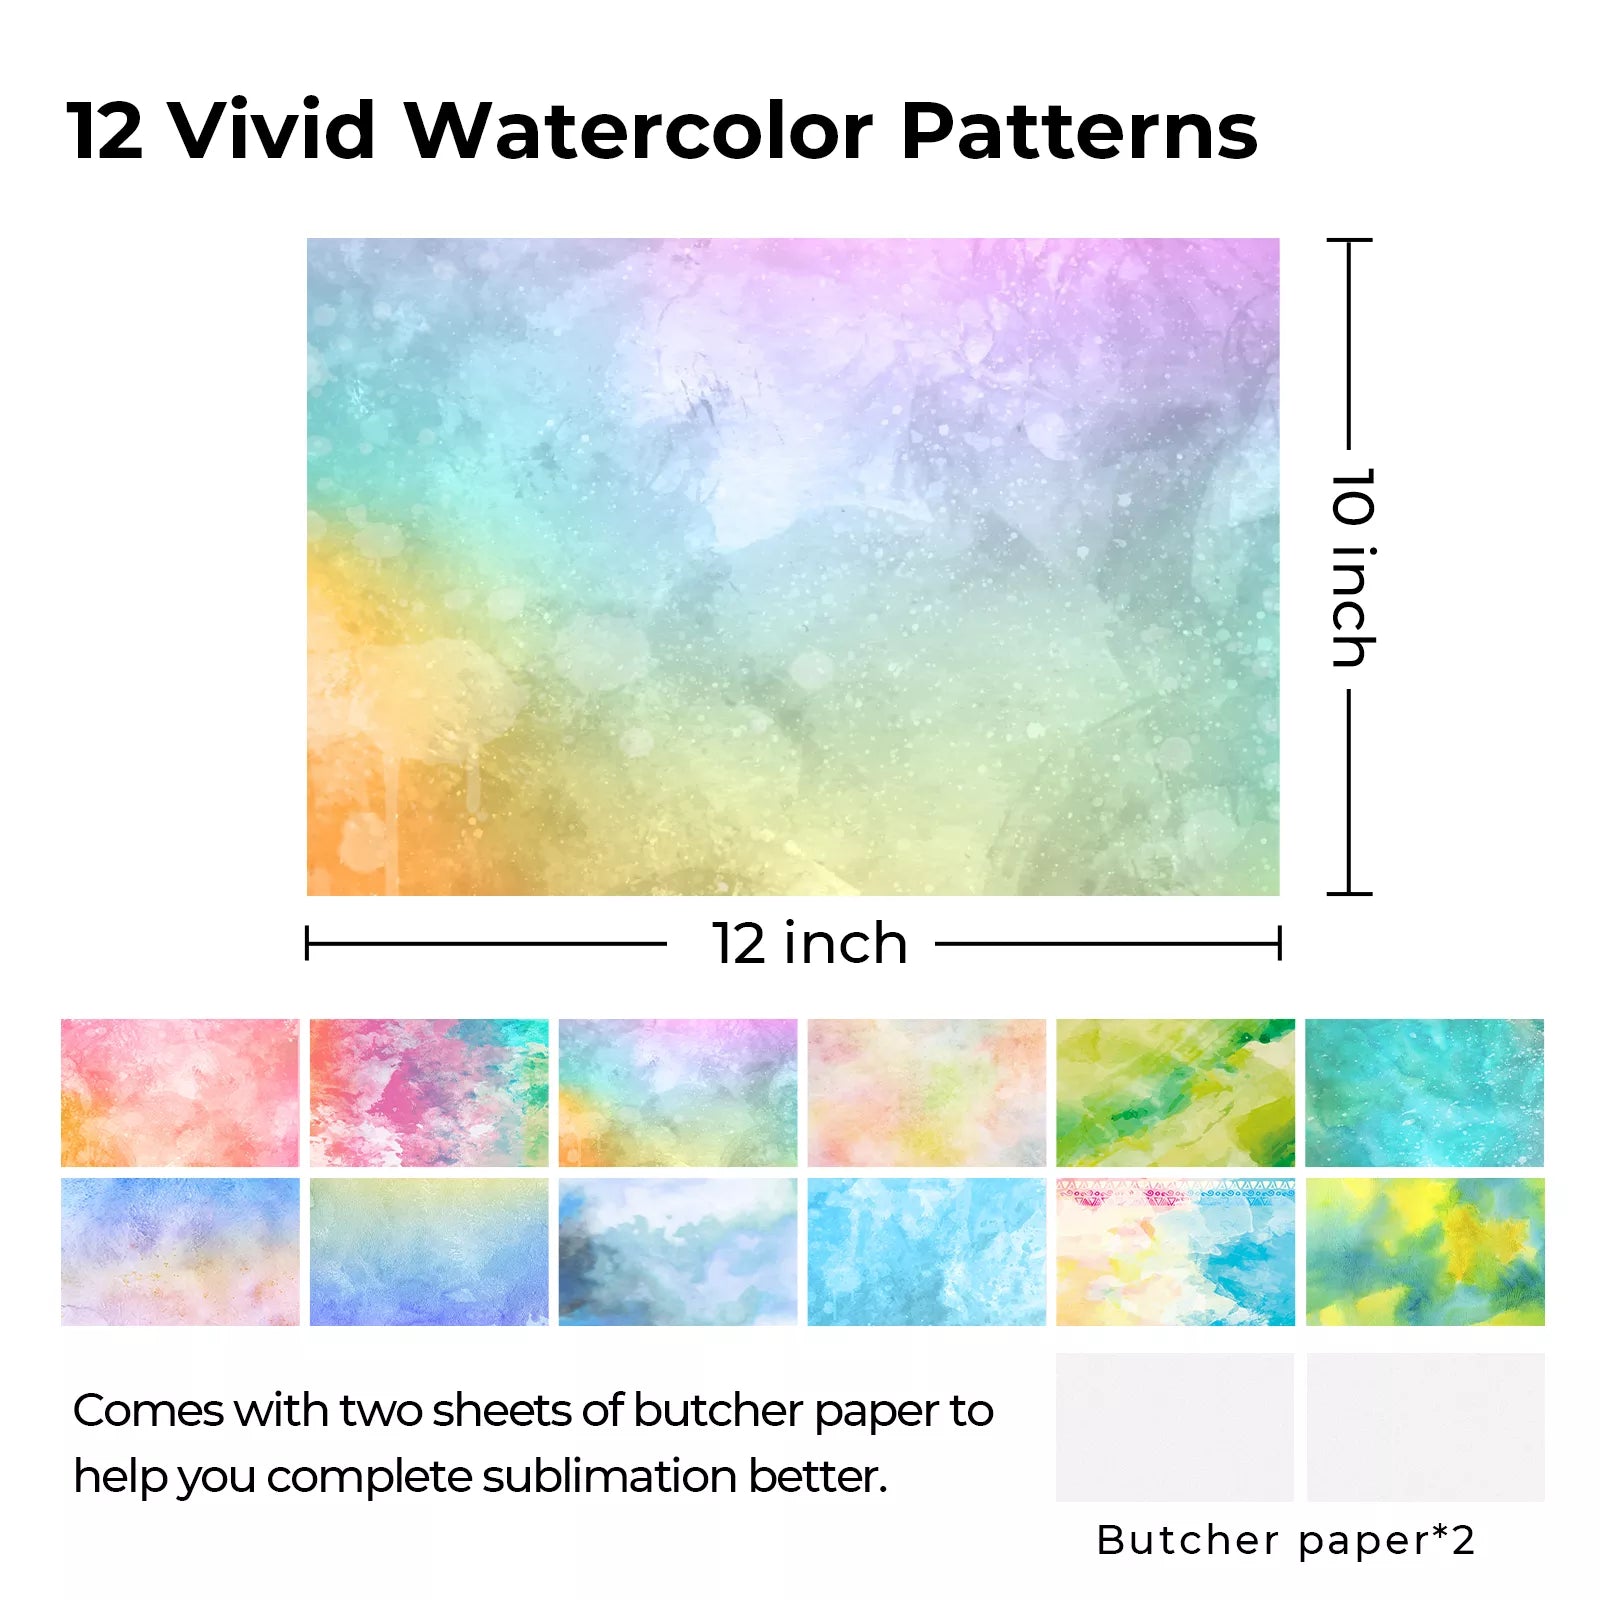 Infusible Ink Transfer Sheets (14pcs)